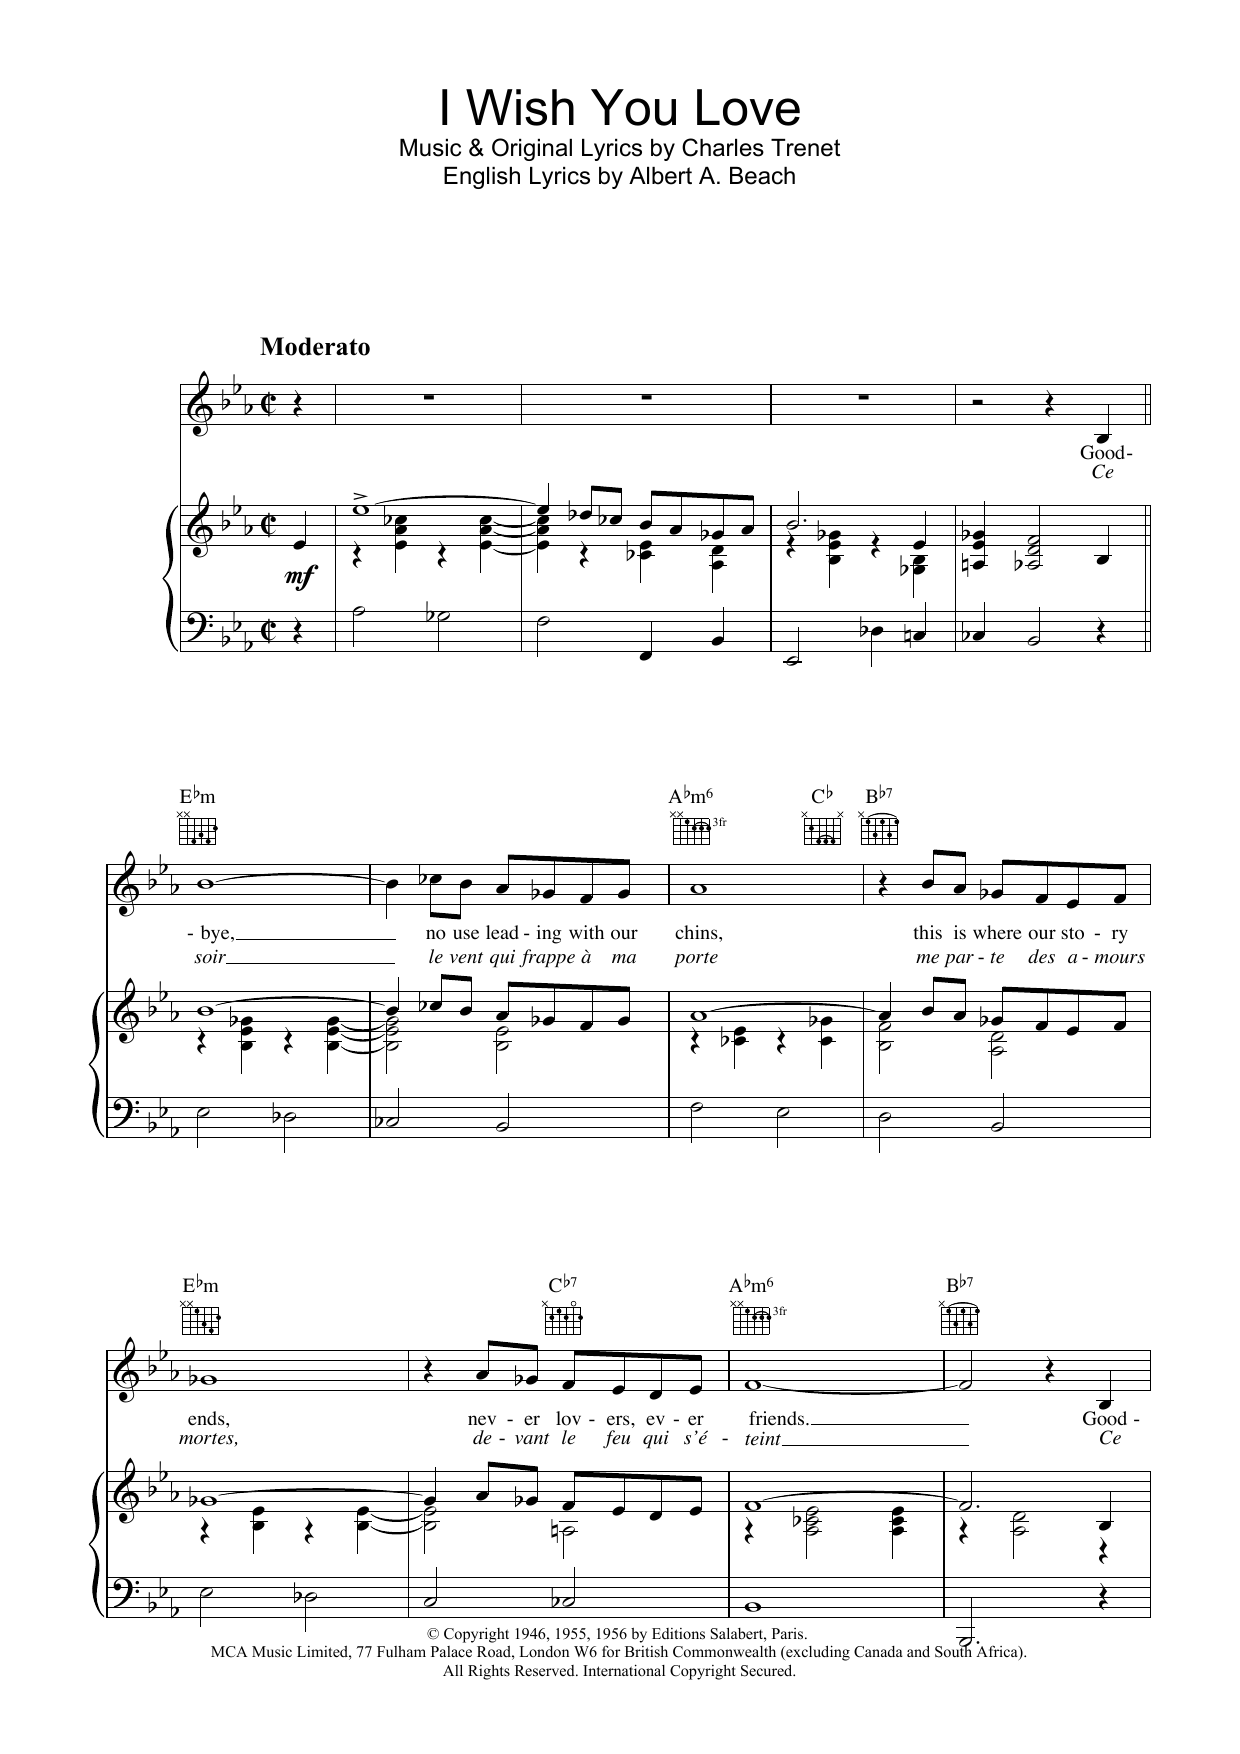 Paul Young I Wish You Love sheet music notes printable PDF score